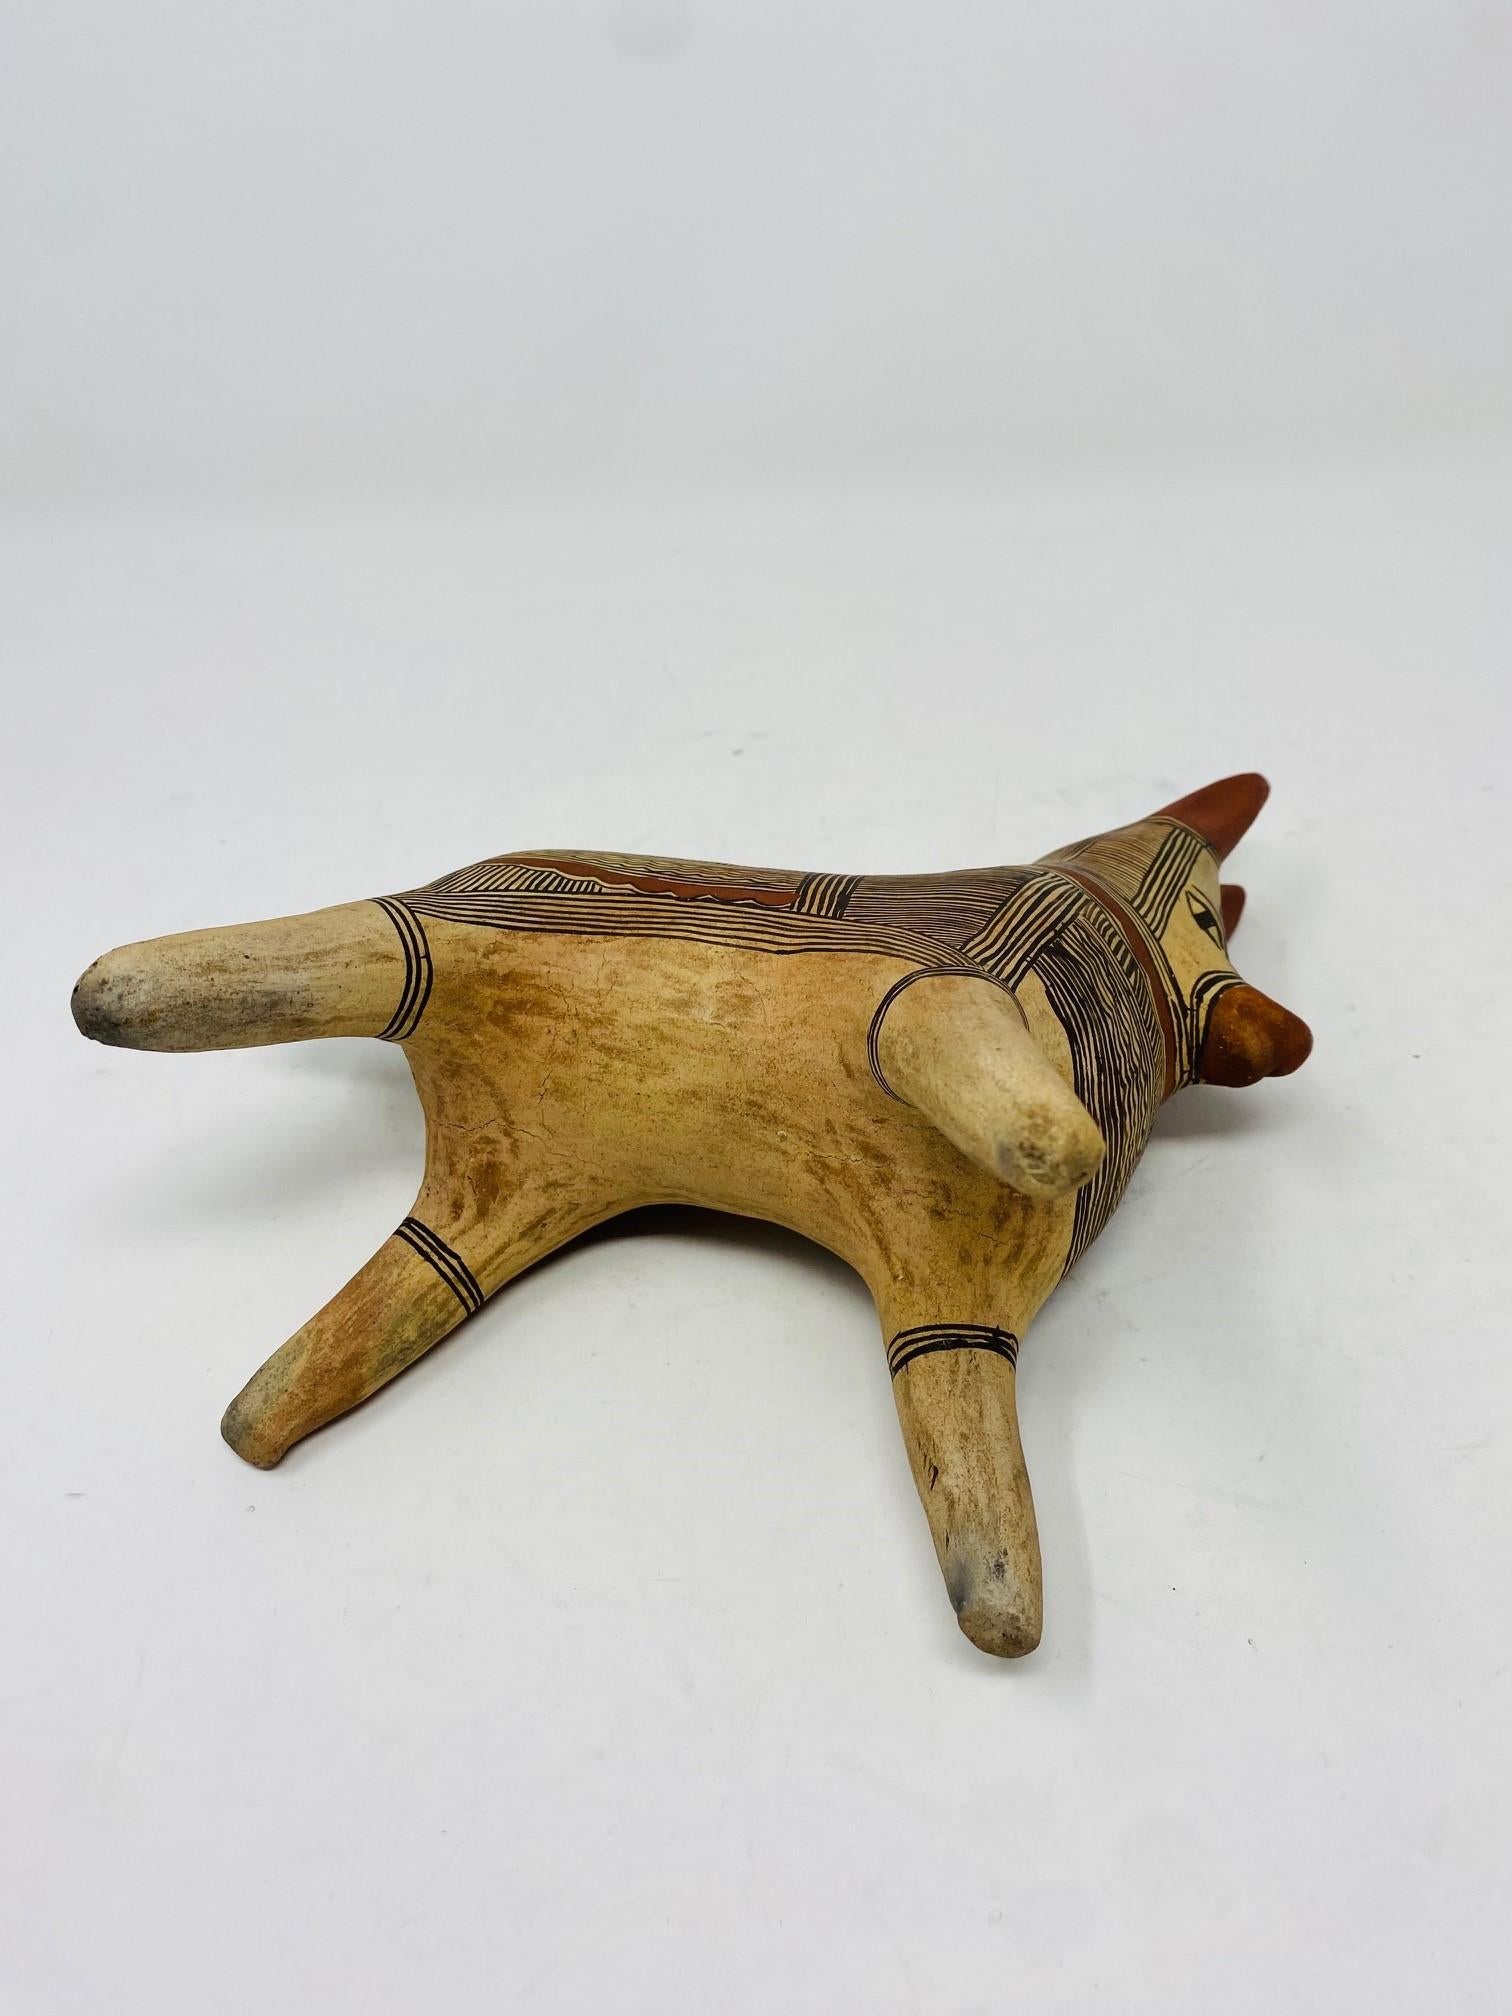 Vintage 1960s Mexican Folk Art Pottery Donkey Sculpture In Good Condition For Sale In San Diego, CA